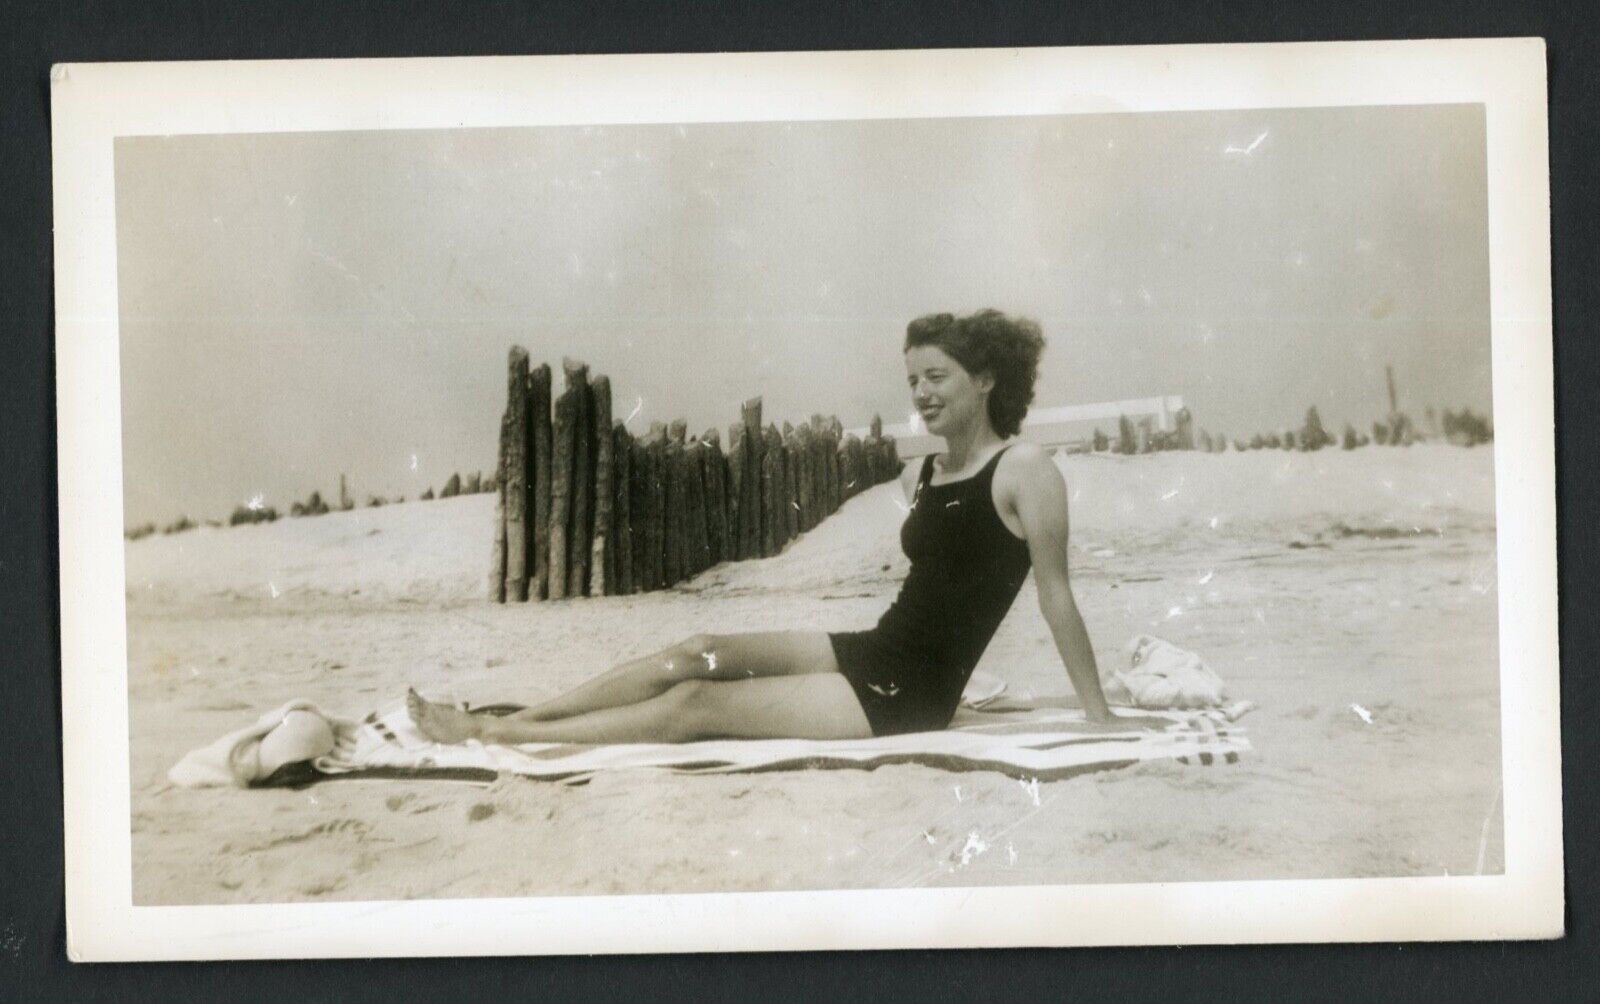 Smiling Swimsuit Woman Sunbathes on Windy Beach Photo 1940s Summer Legs Toes